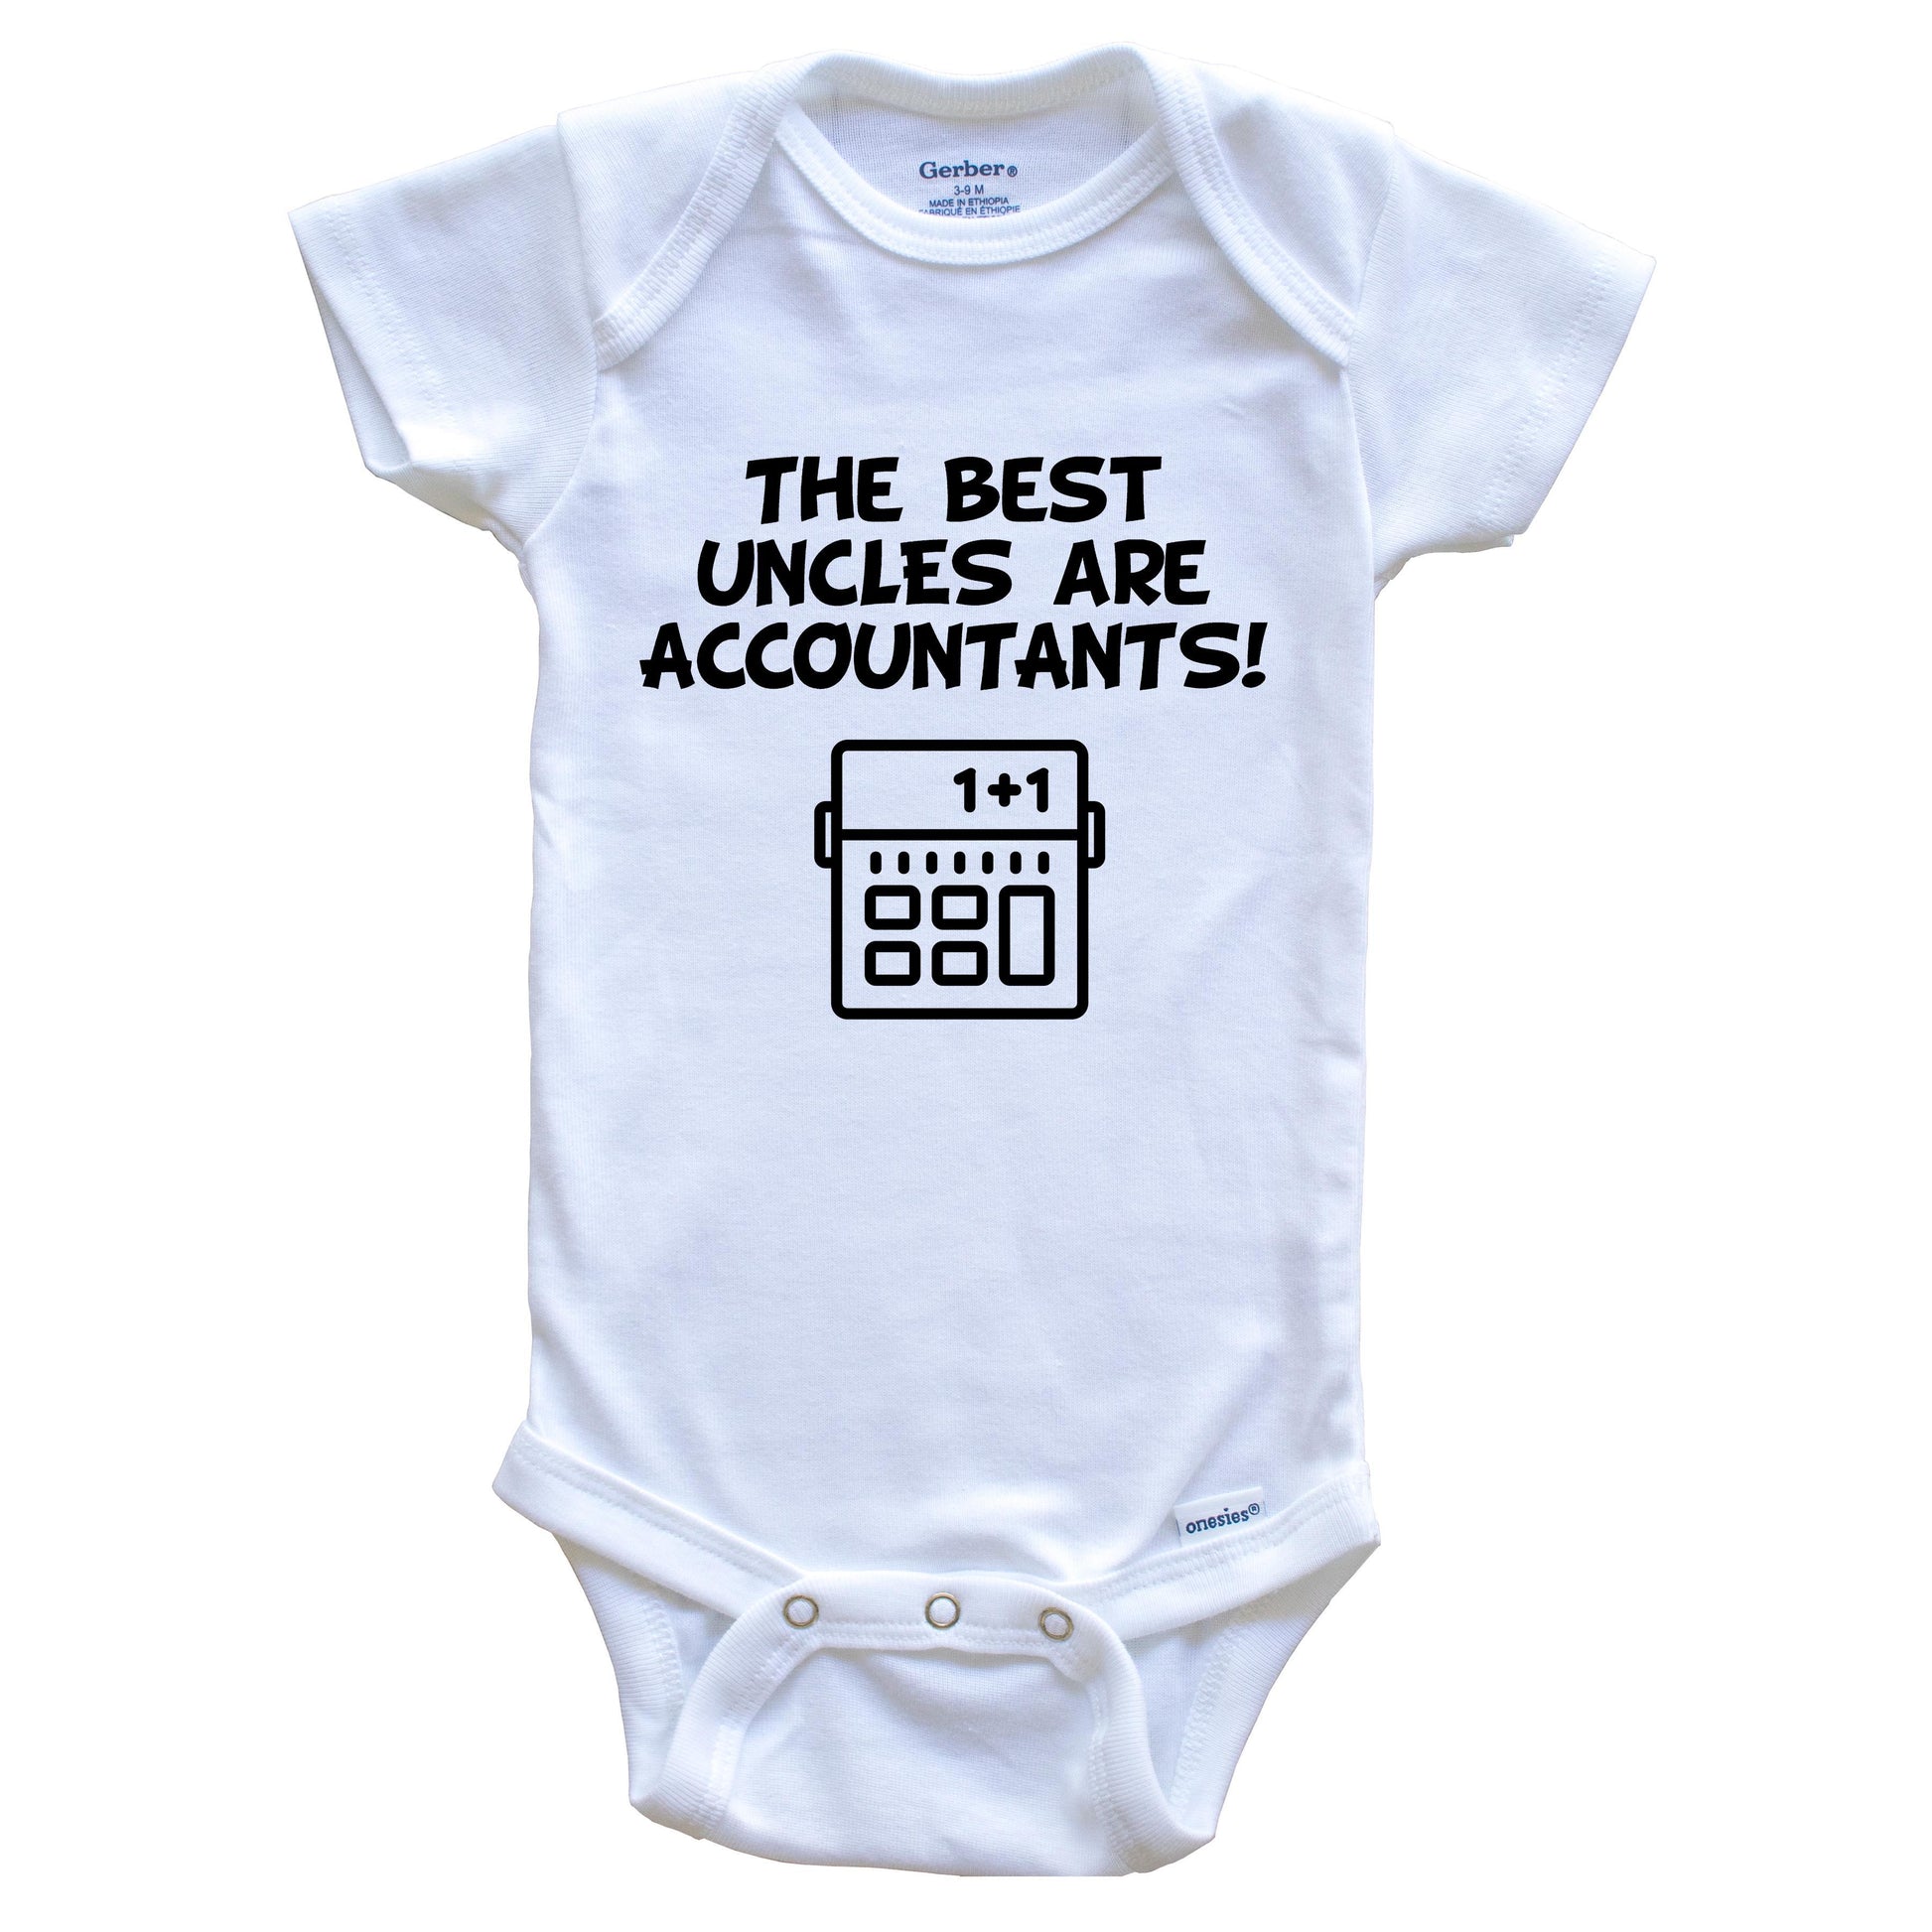 The Best Uncles Are Accountants Funny Niece Nephew Baby Onesie